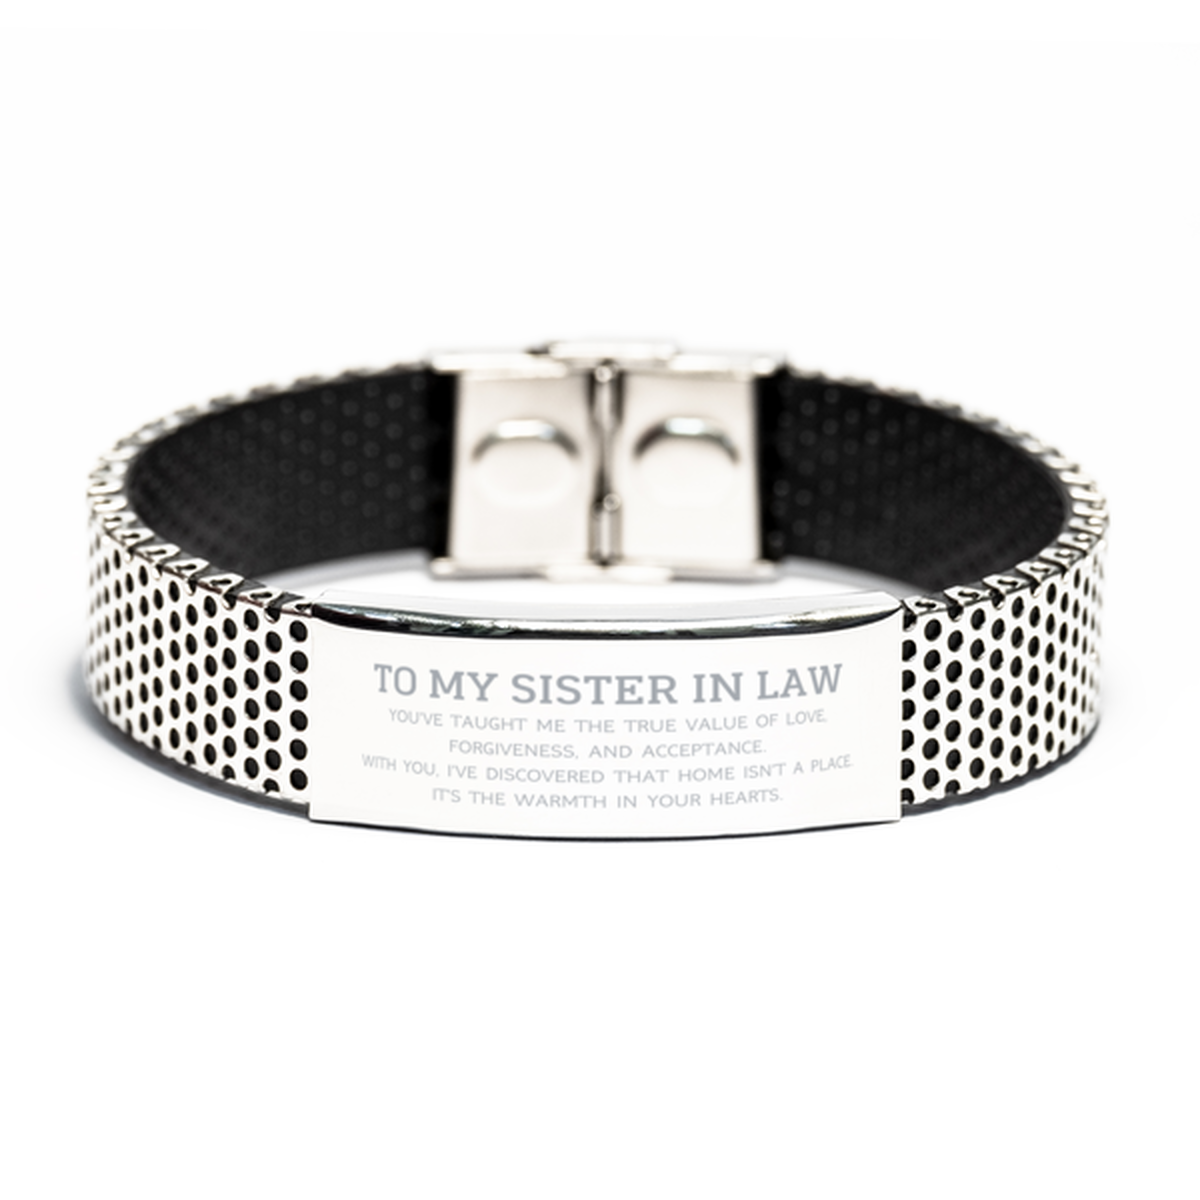 To My Sister In Law Gifts, You've taught me the true value of love, Thank You Gifts For Sister In Law, Birthday Stainless Steel Bracelet For Sister In Law